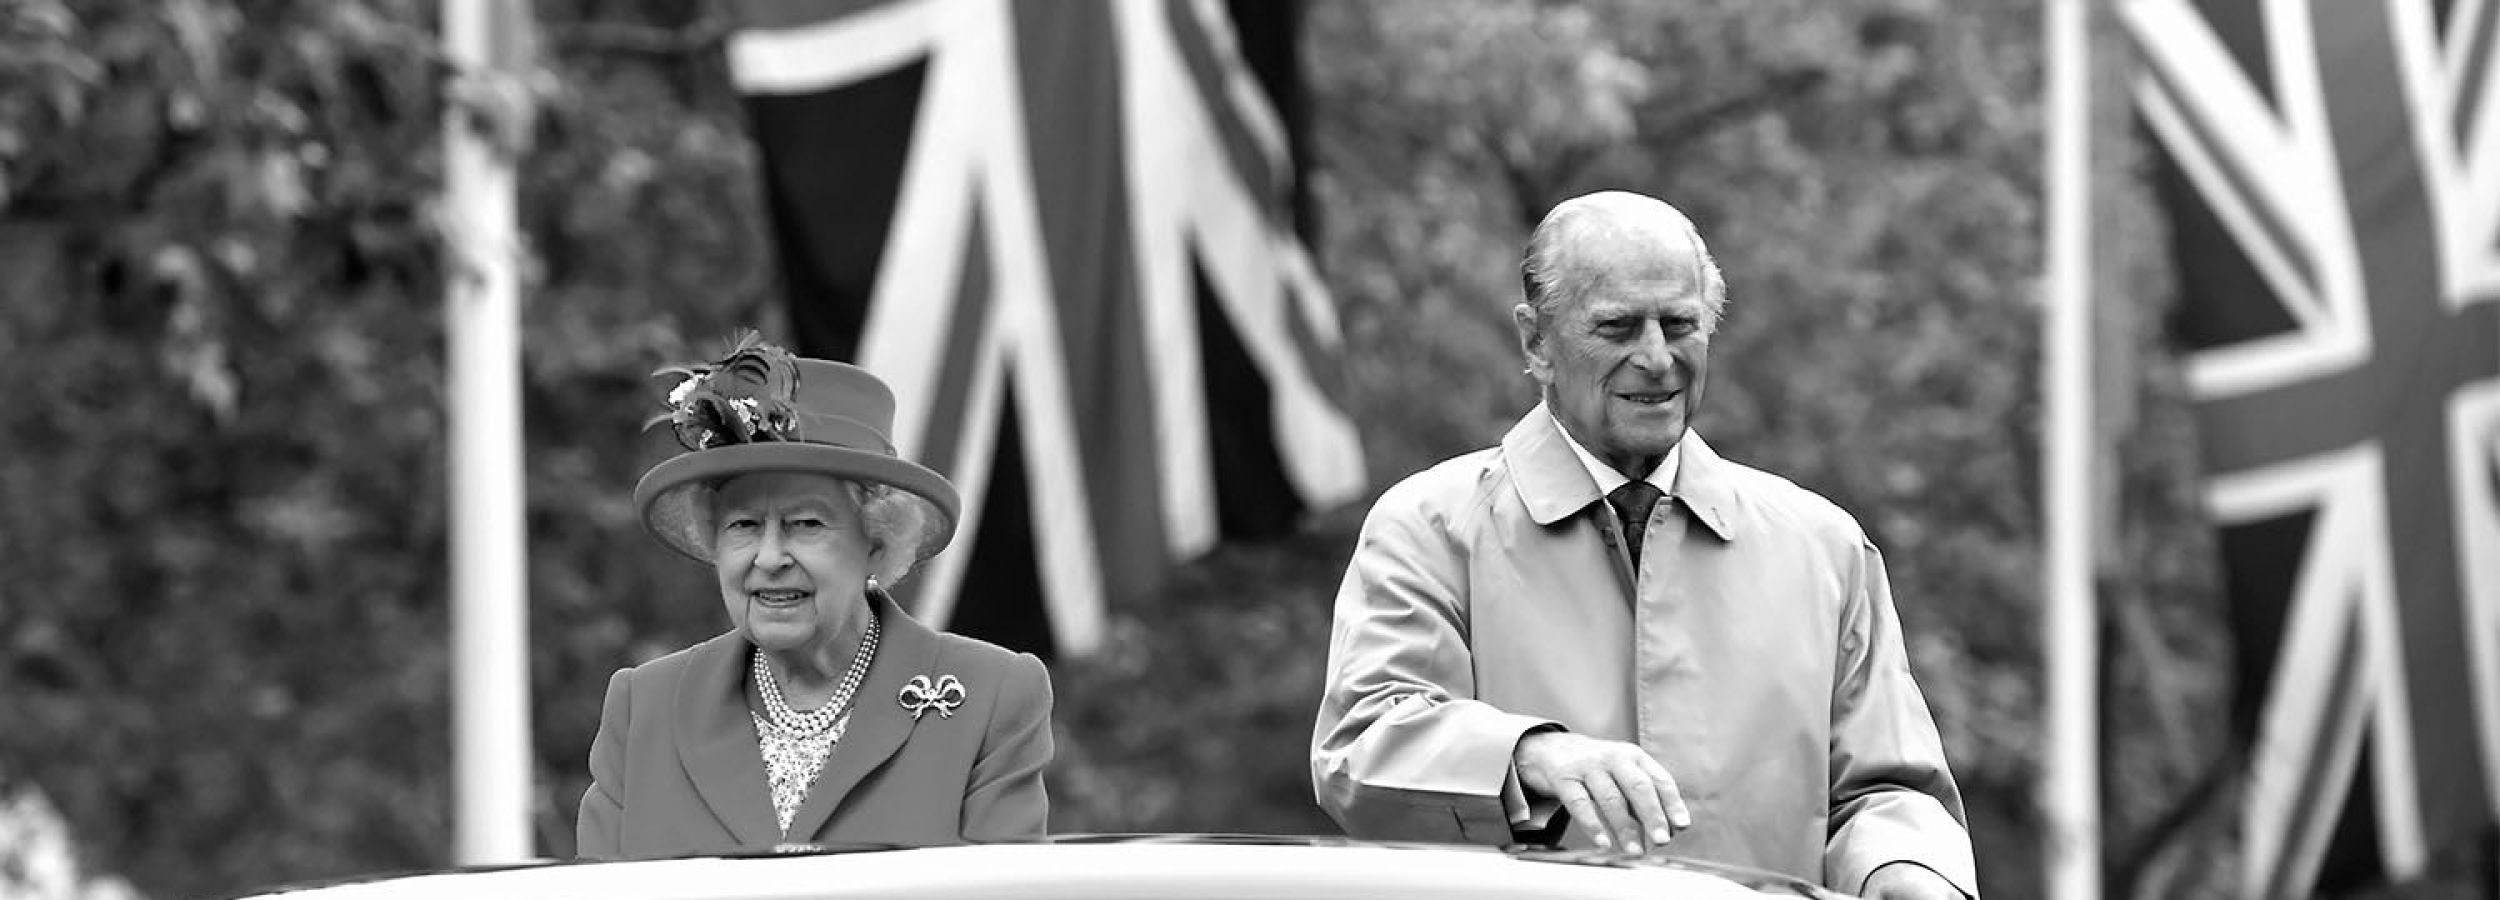 The queen and The Duke of Edinburgh